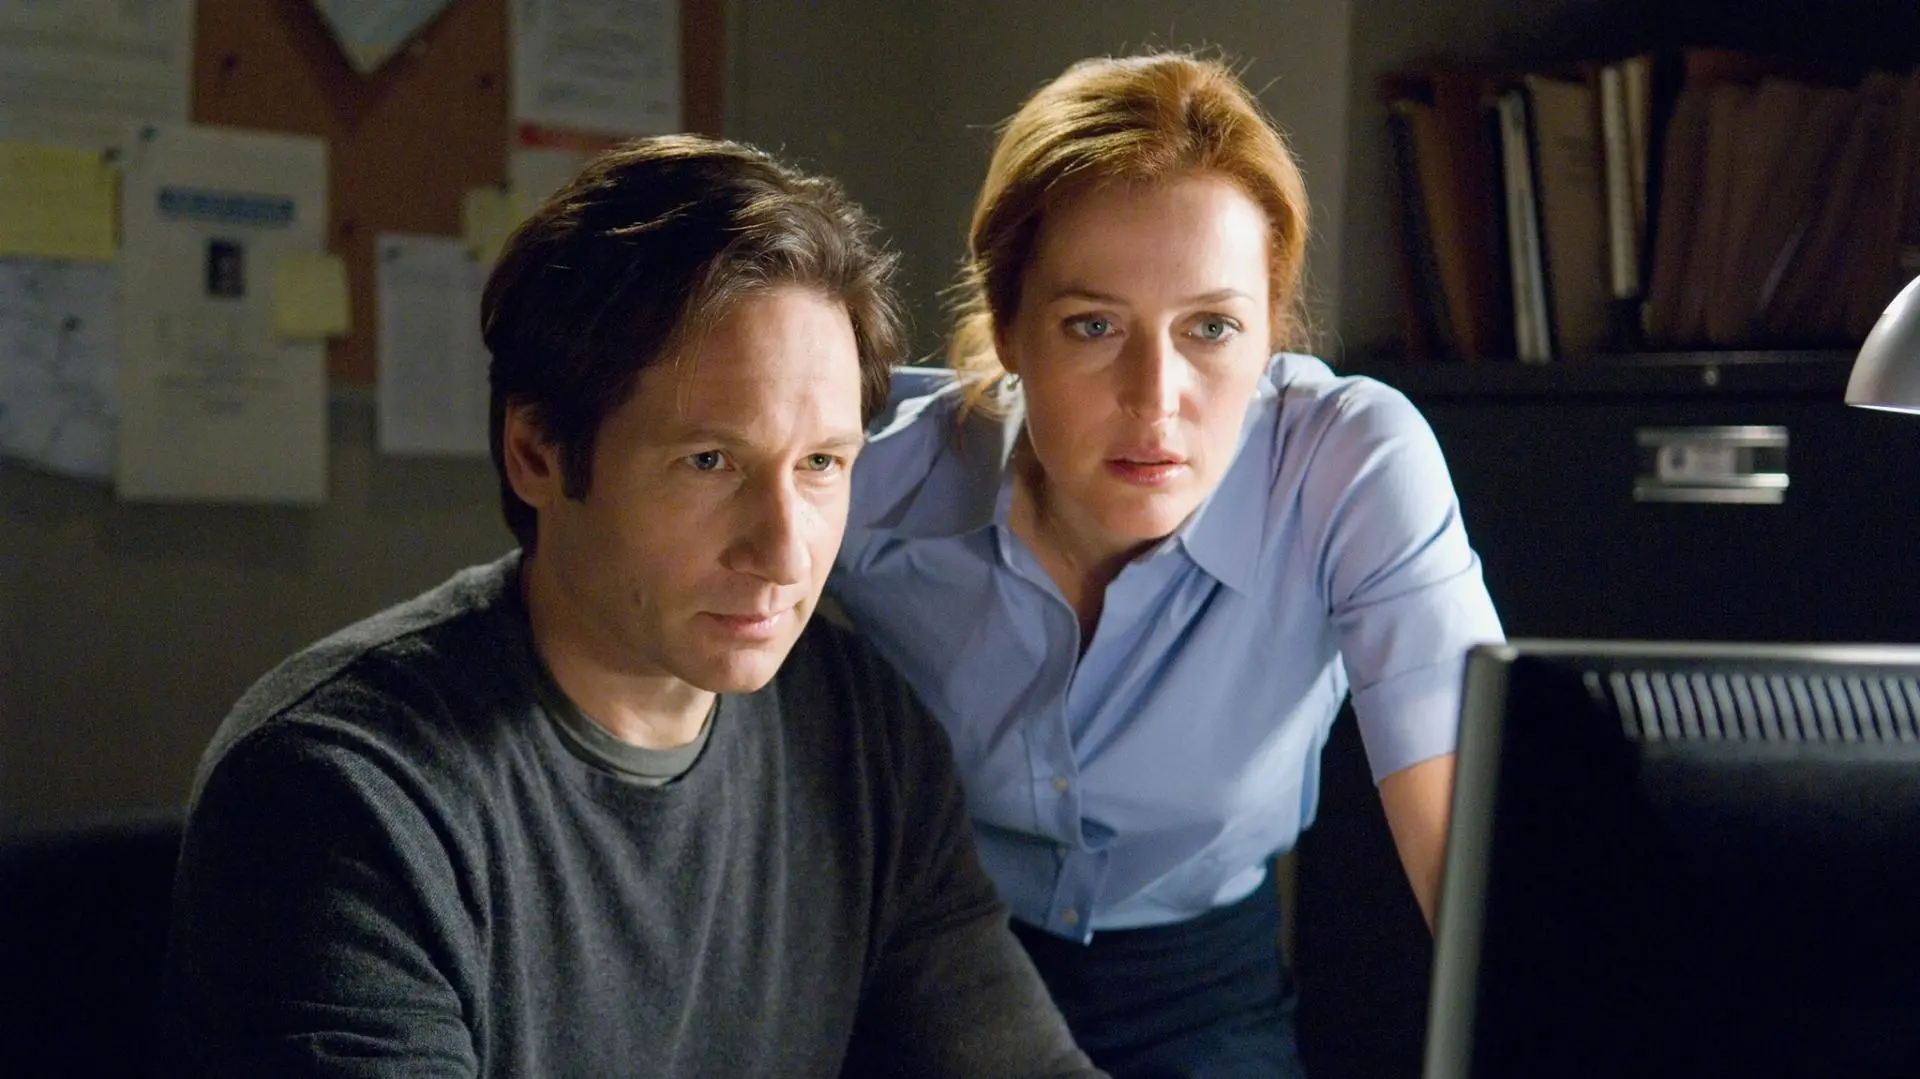 The X Files: I Want to Believe_peliplat